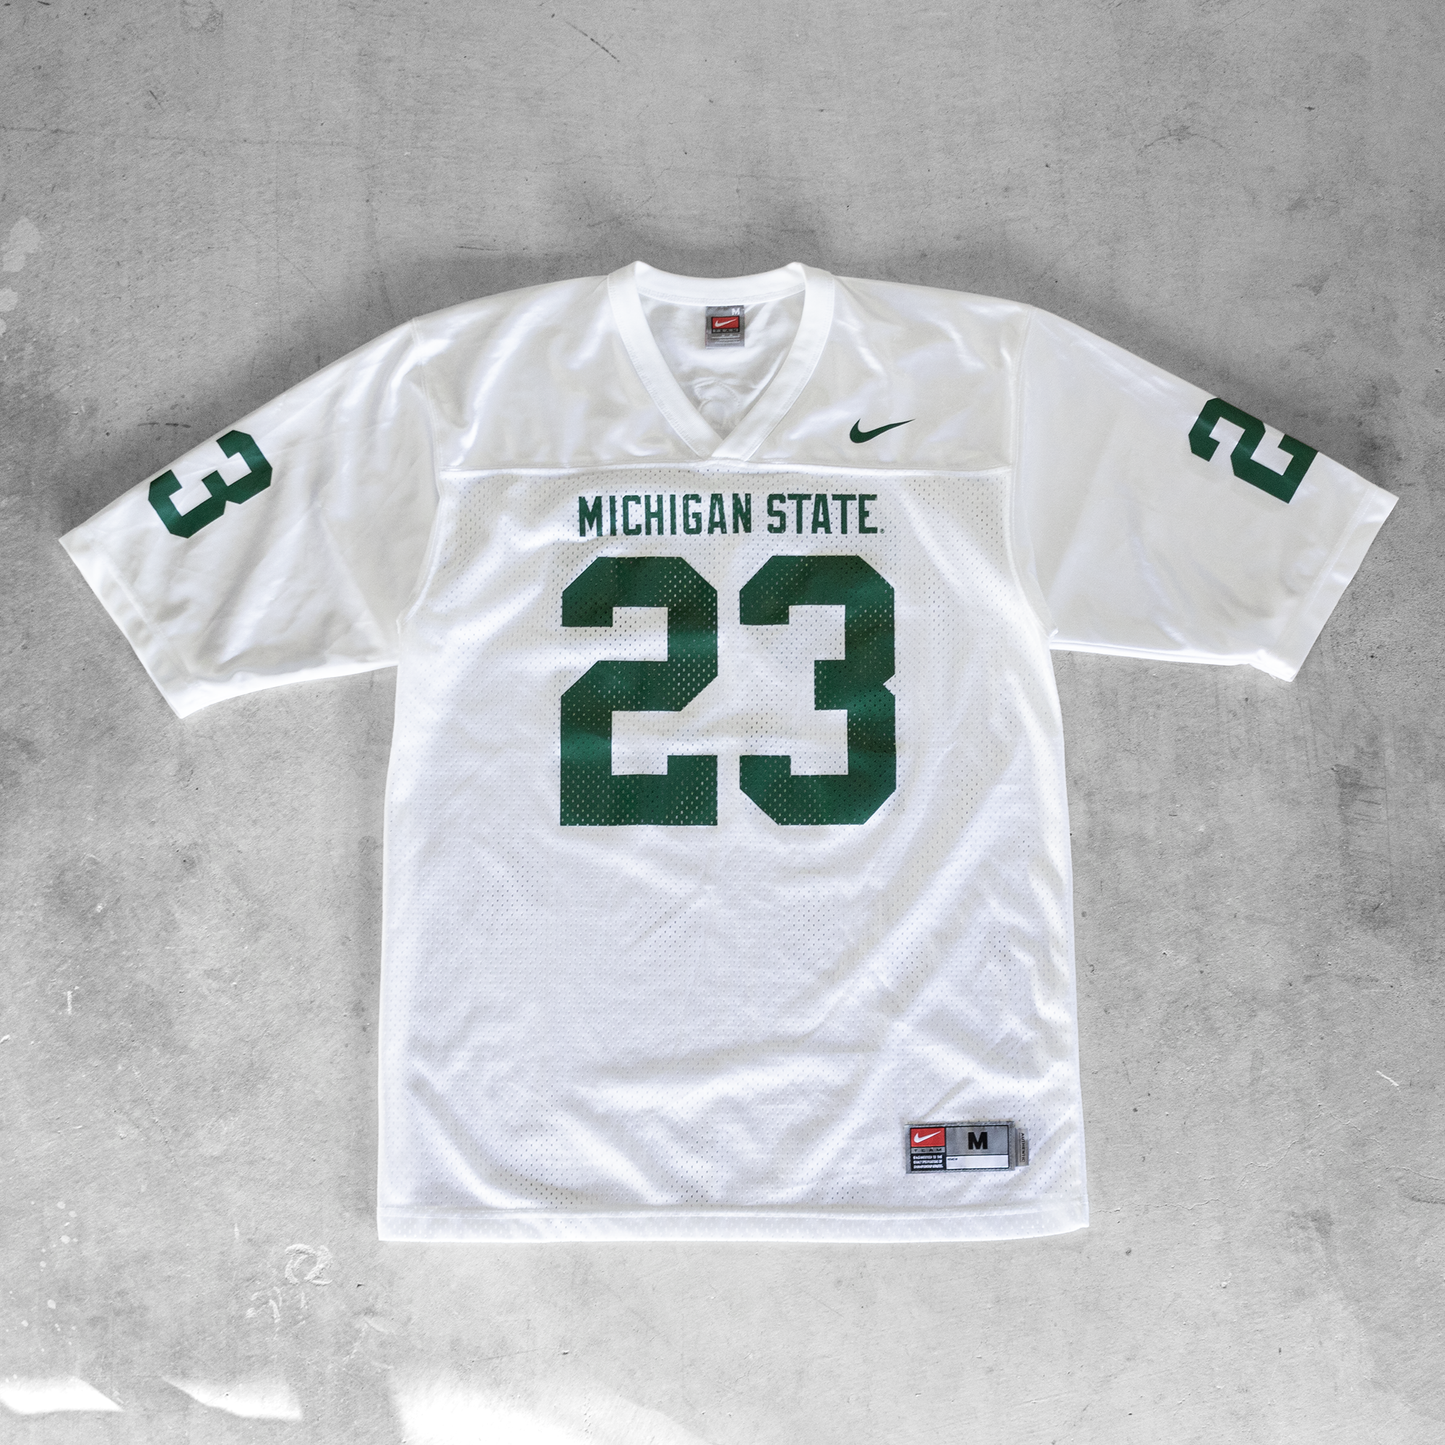 Vintage Michigan State Spartans #23 Football Jersey (M)